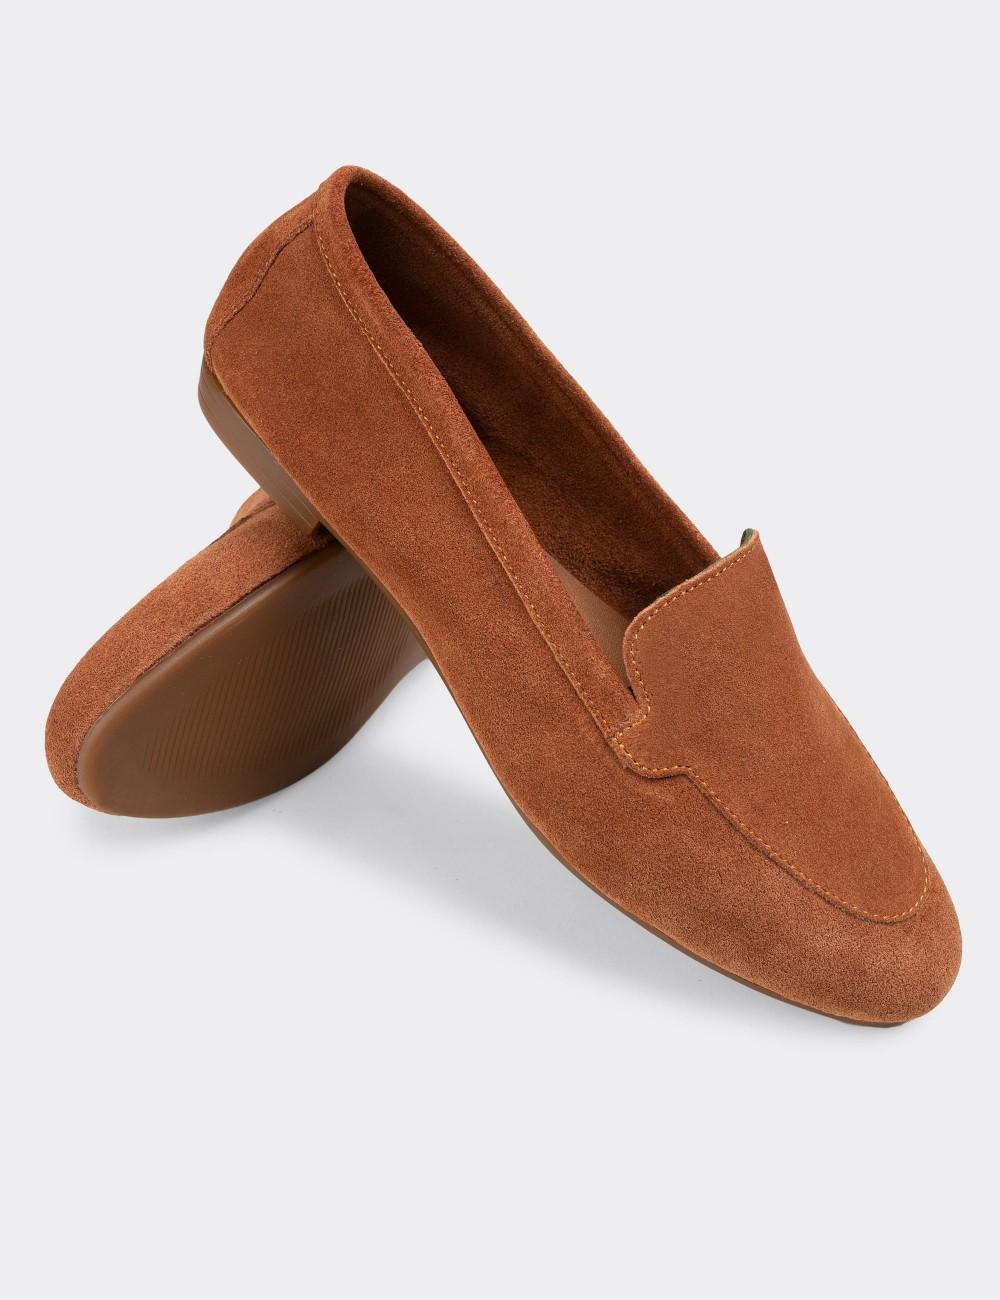 Tan Suede Leather Loafers - E3206ZTBAC03